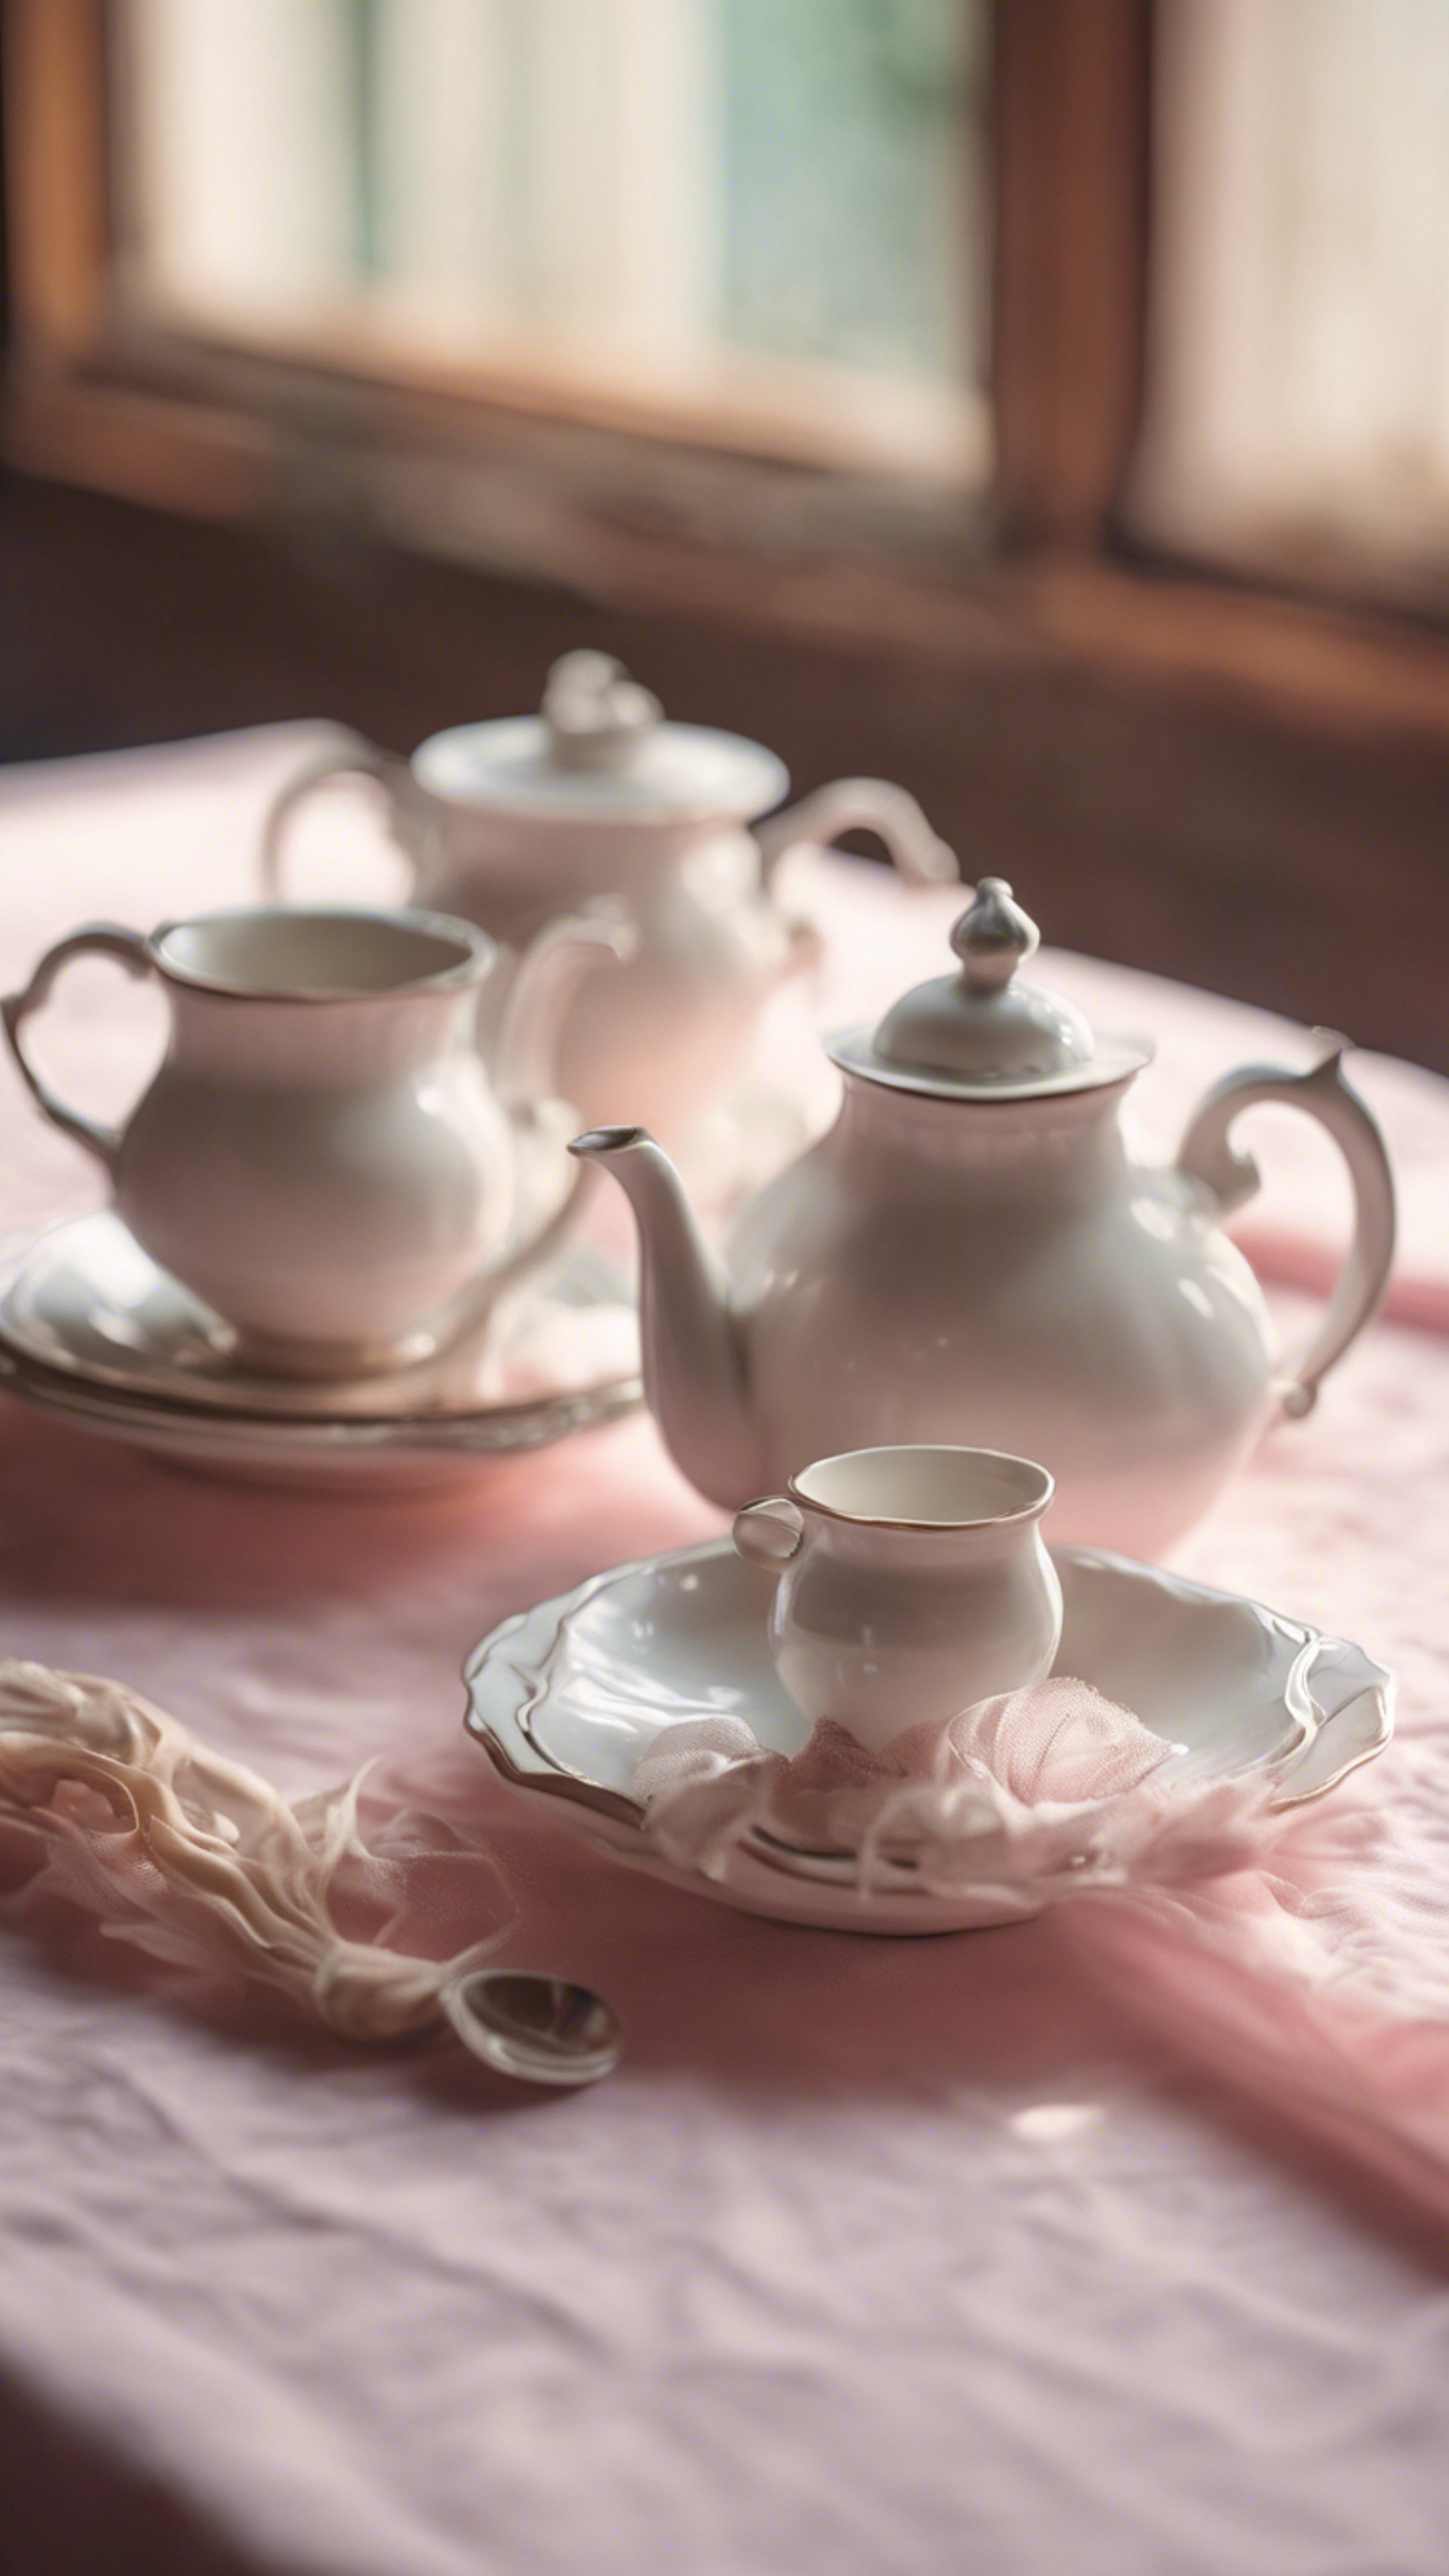 A vintage white tea set, arranged on a fluffy pastel pink tablecloth in a charming, old-world kitchen. 牆紙[519305883ddb44018966]